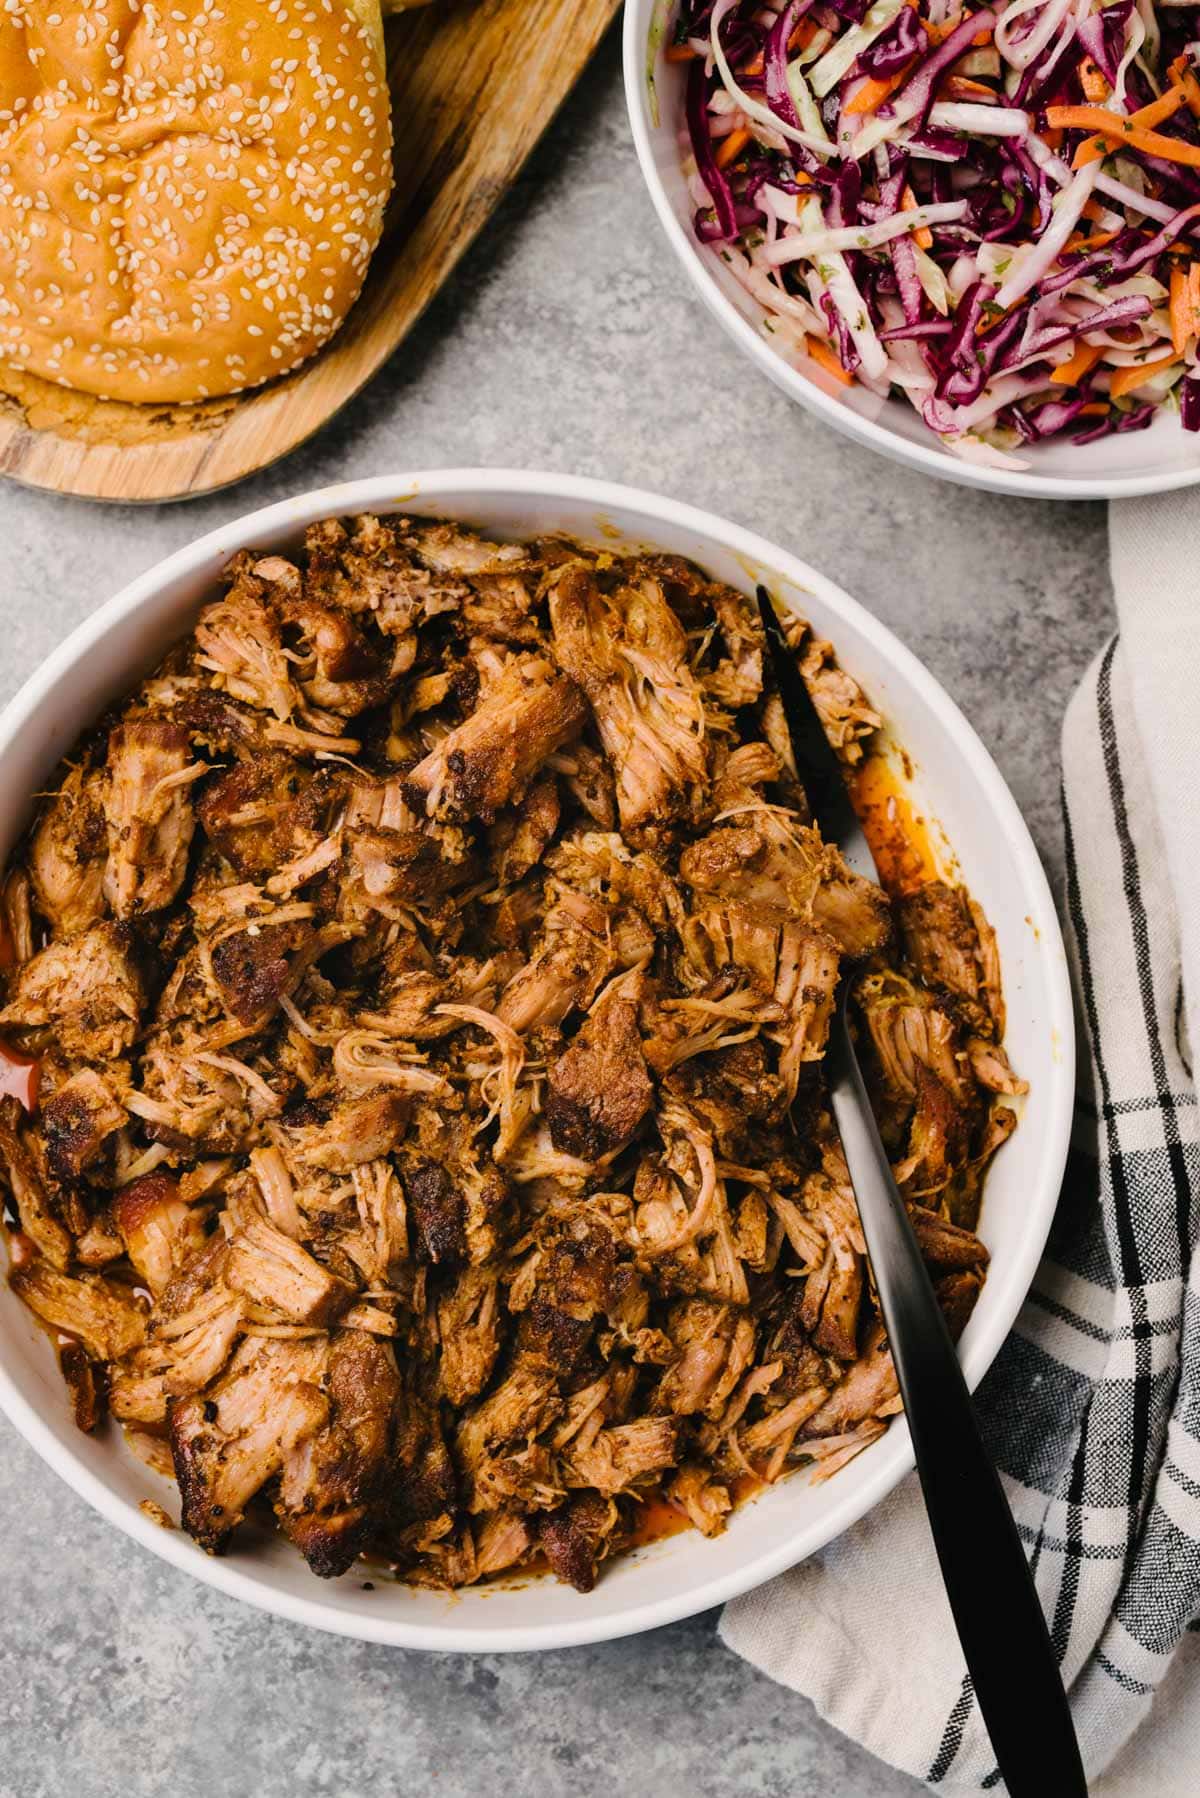 A black serving fork tucked into a white serving bowl of pulled pork; a bowl of coleslaw, tray of brioche buns, and a linen napkin surround the bowl.